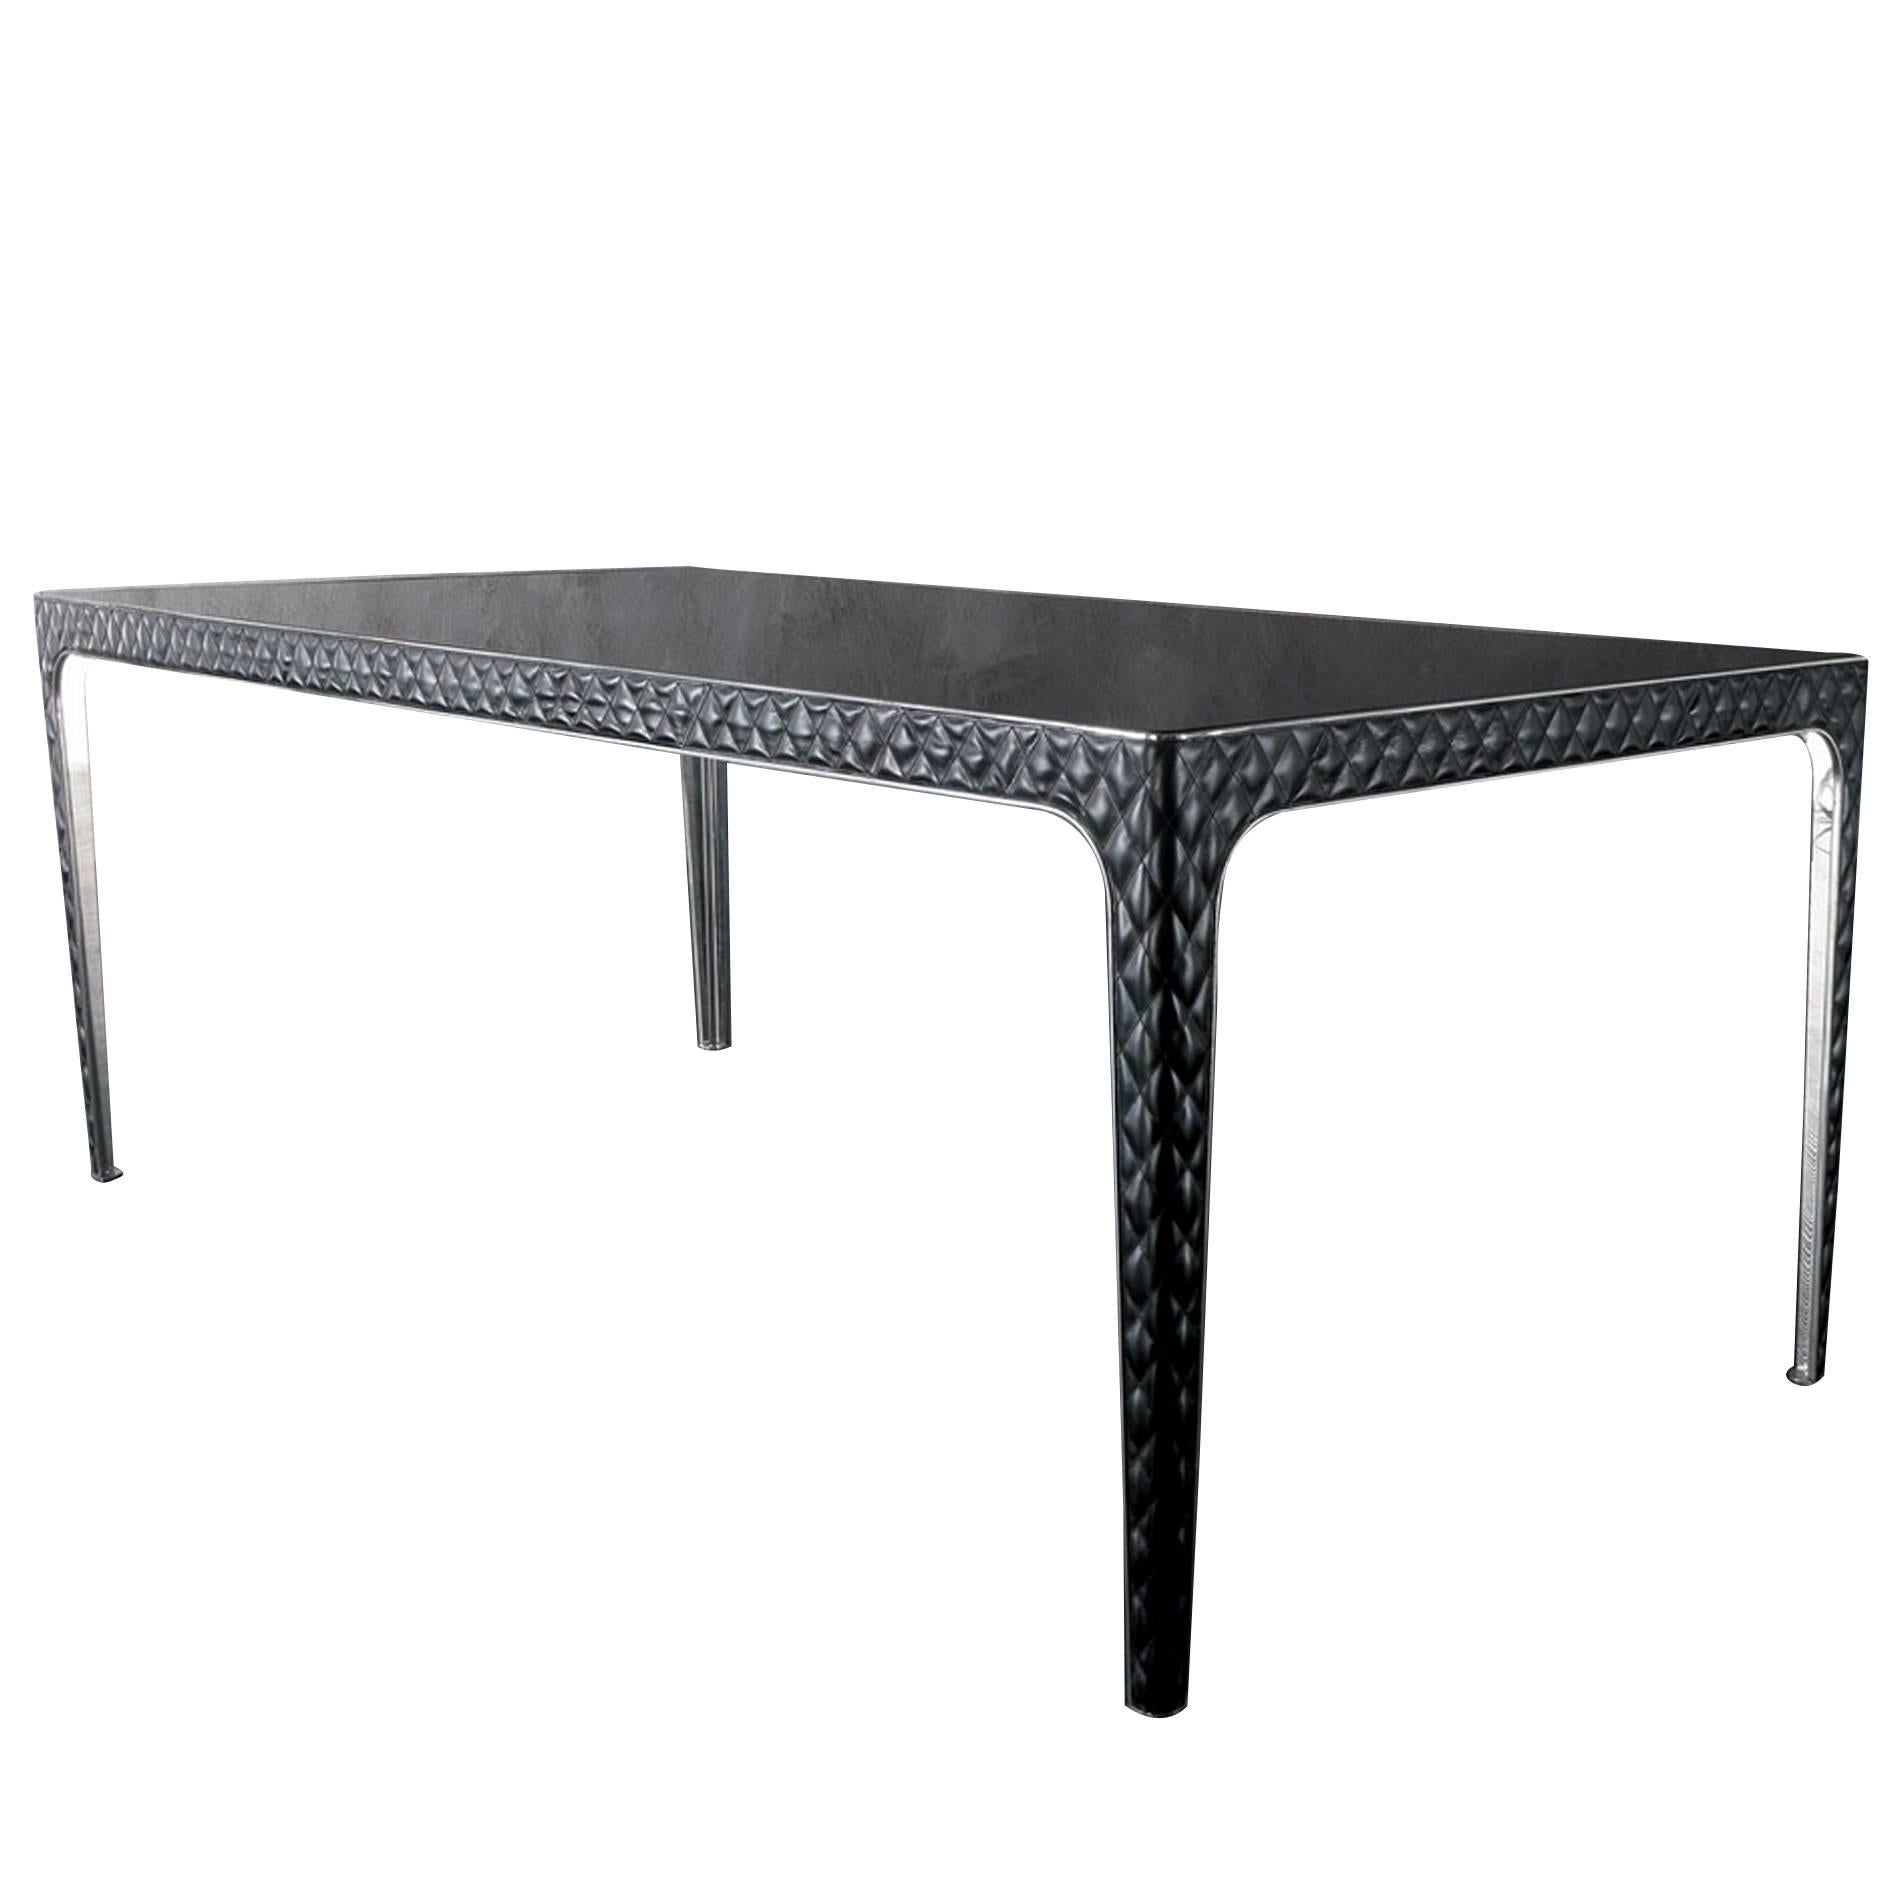 Shadow Table Genuine Leather and Stainless Steel Structure